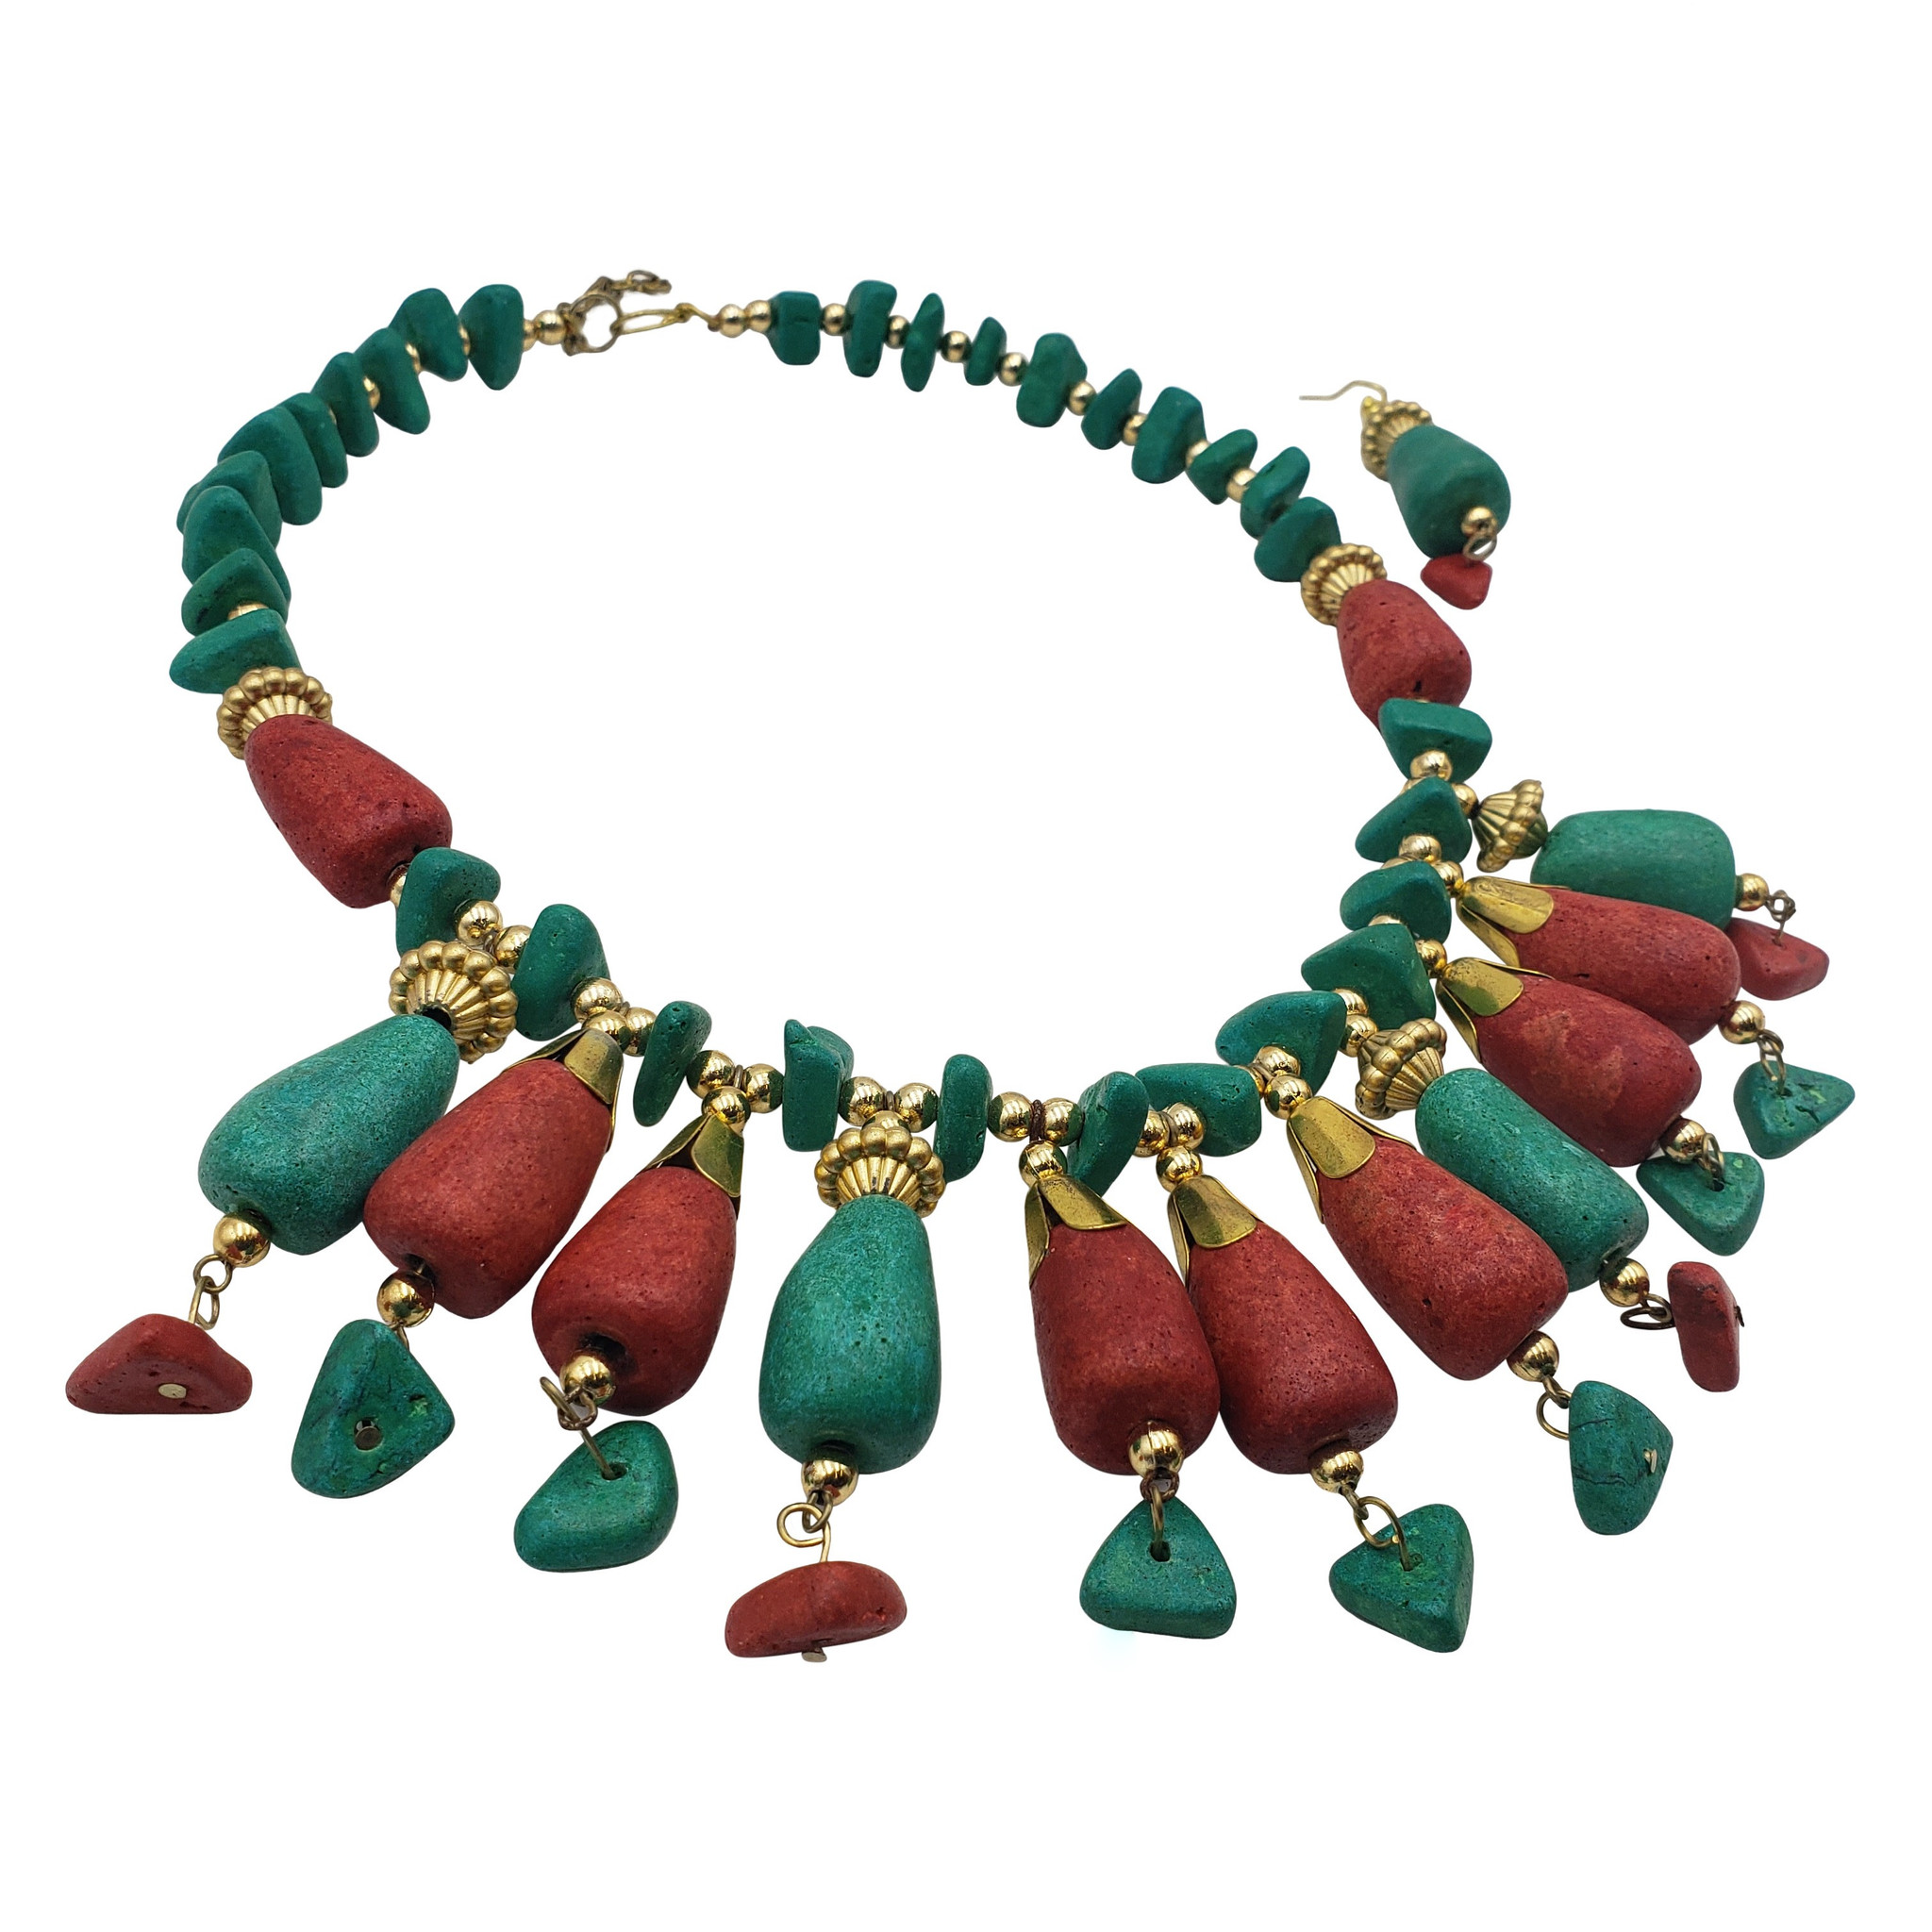 Anaki Clay Bead Necklace Earring Set - Turquoise and Coral Tone Beads